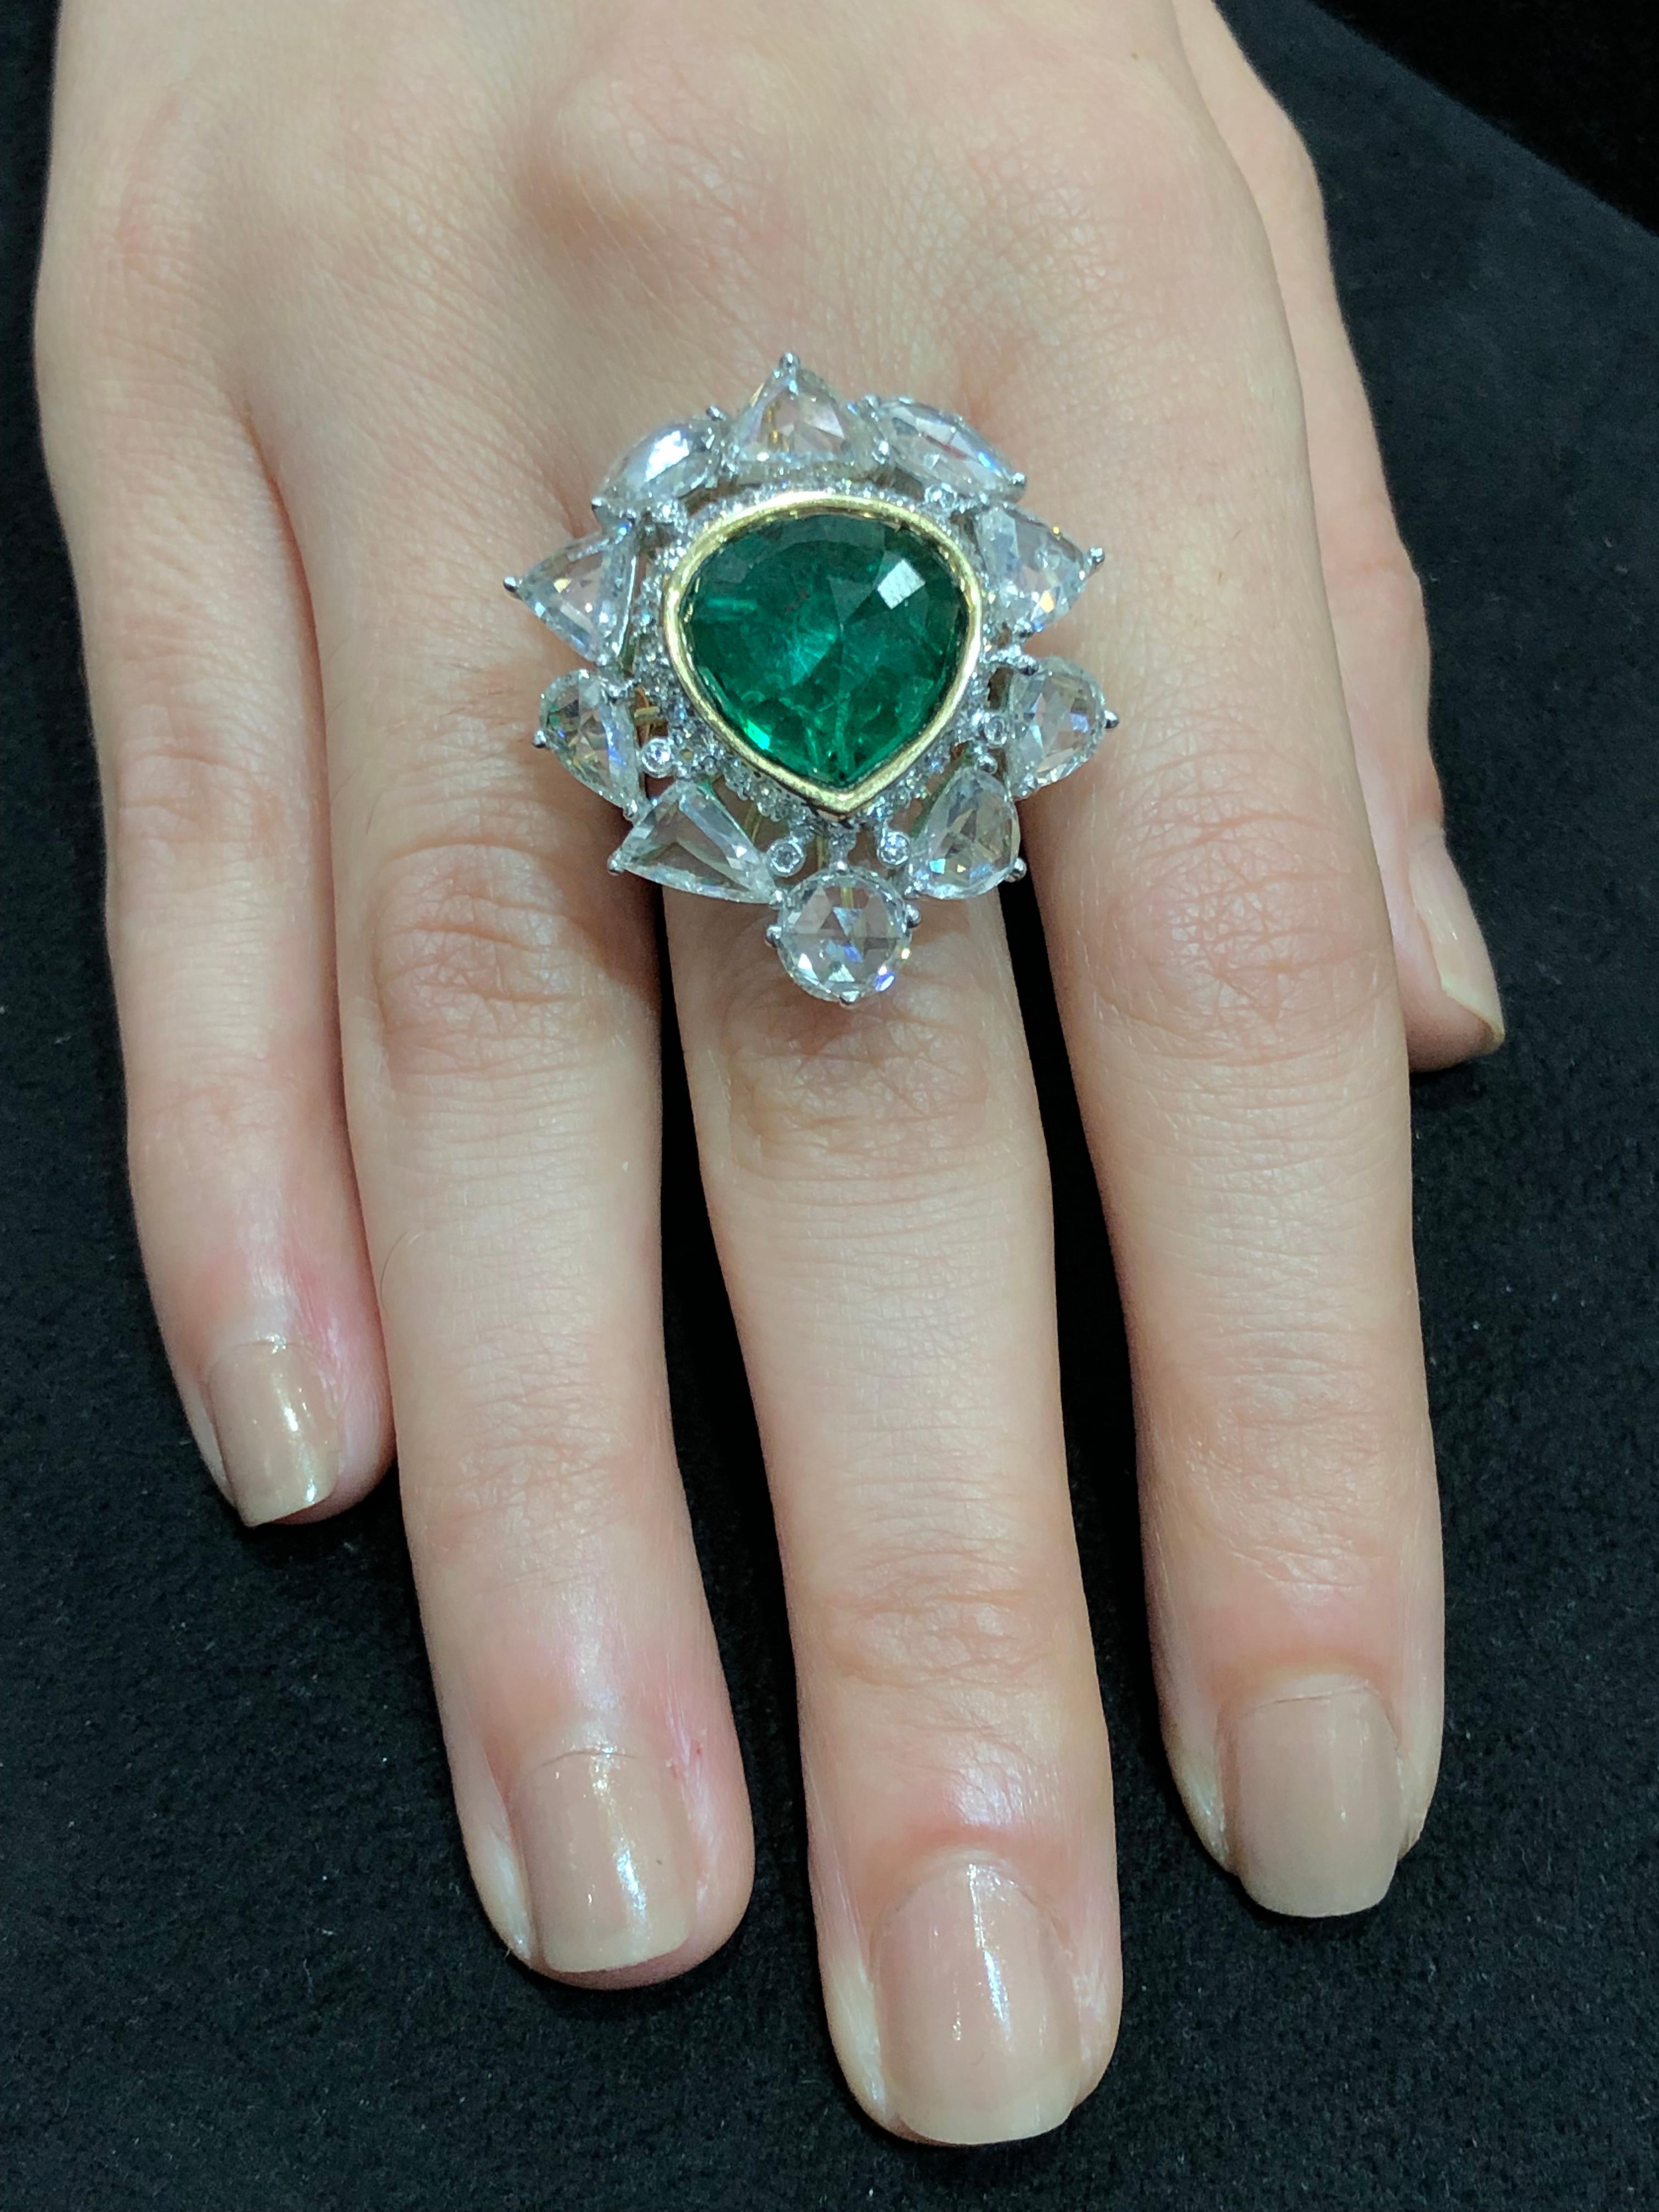 Diamonds: 6.88 carats
Emerald: 7.28 carats
18kt Gold: 10.518 grams
Ref No: DR-CEF

Undeniably, the best pick for glittering night out, showcasing our rose-cut diamond rind with a rare Zambian emerald.